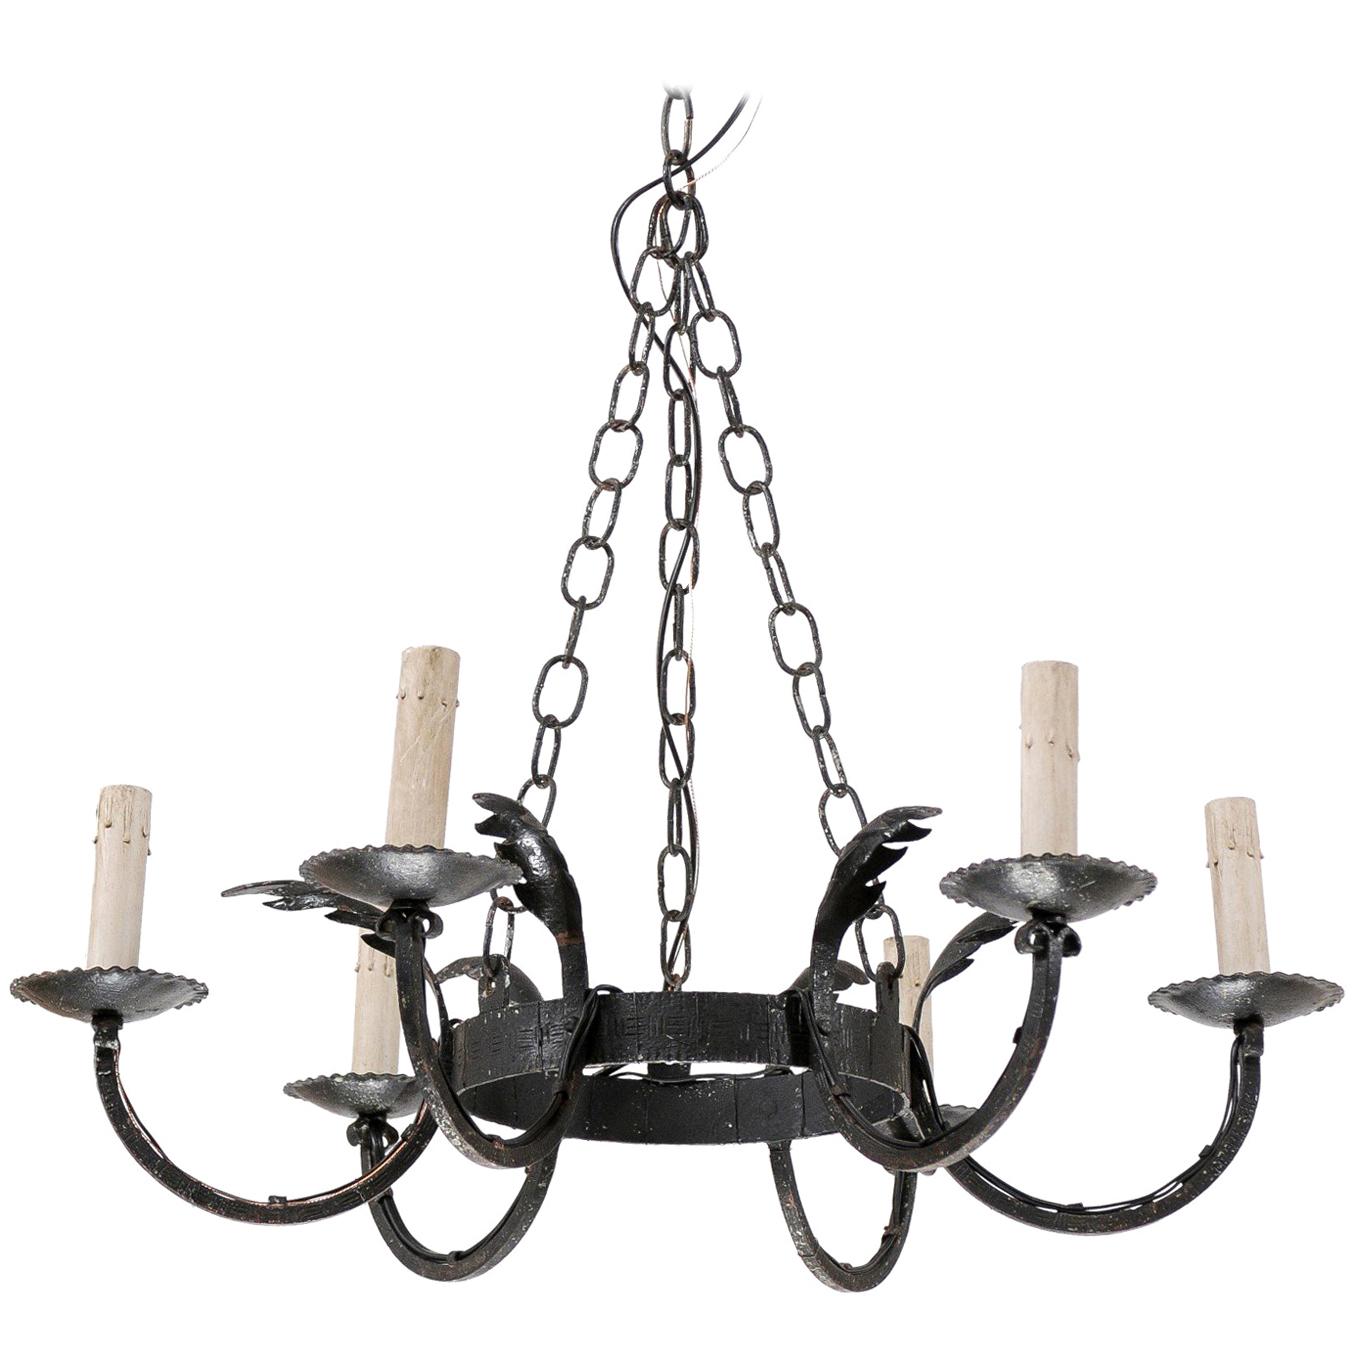 French 6-Light Round Iron Chandelier from the Mid-20th Century